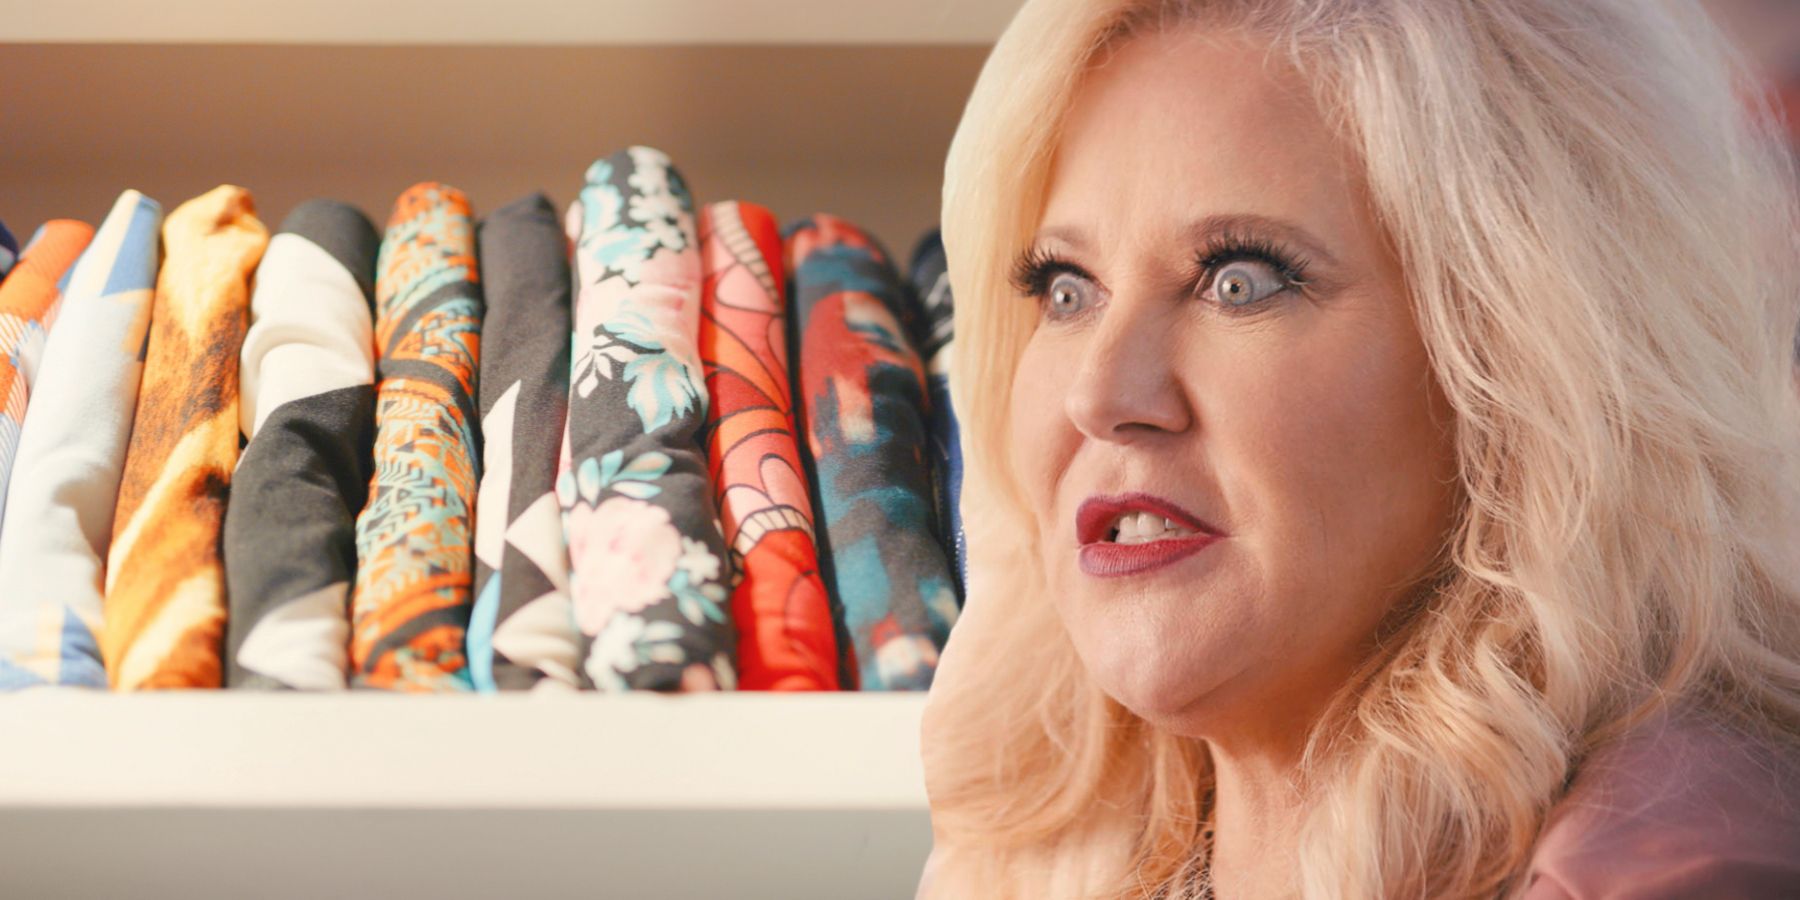 LulaRich': How Many Episodes of the LulaRoe Documentary Are There?